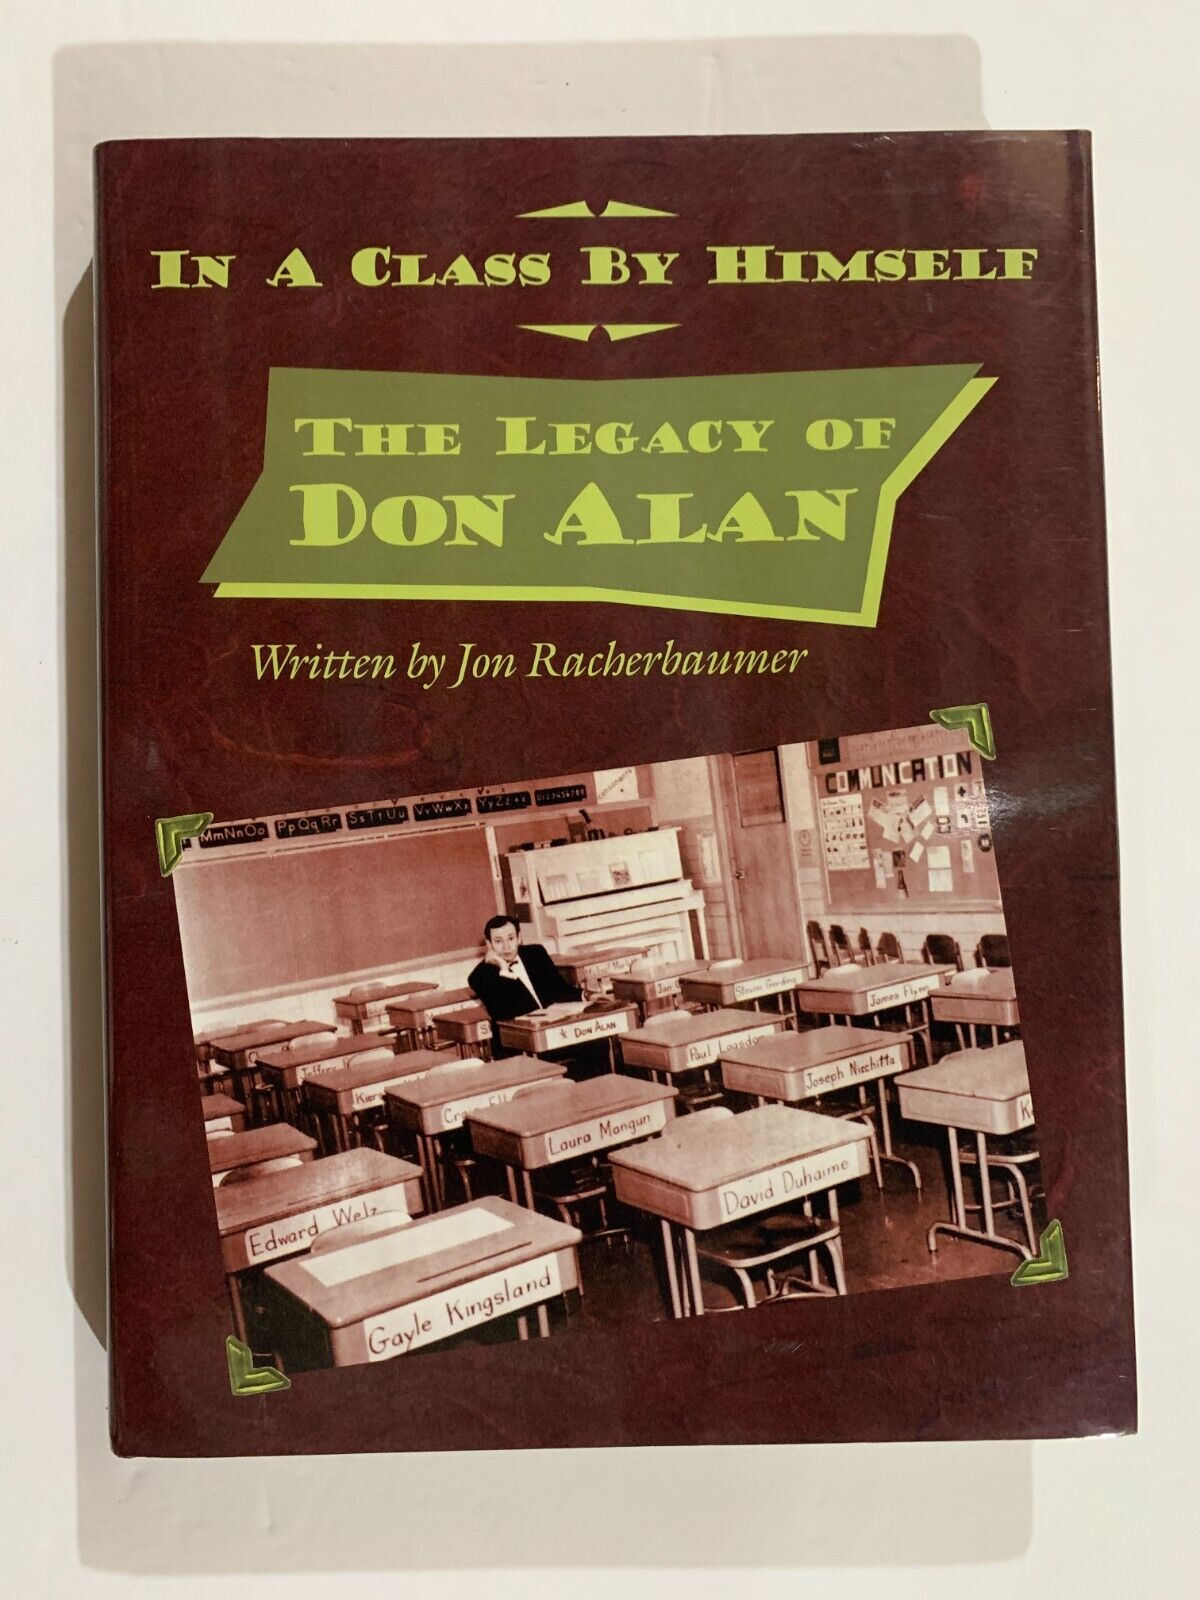 The Legacy of Don Alan--In A Class by Himself-Comedy Magic Illusion Book-1st Ed